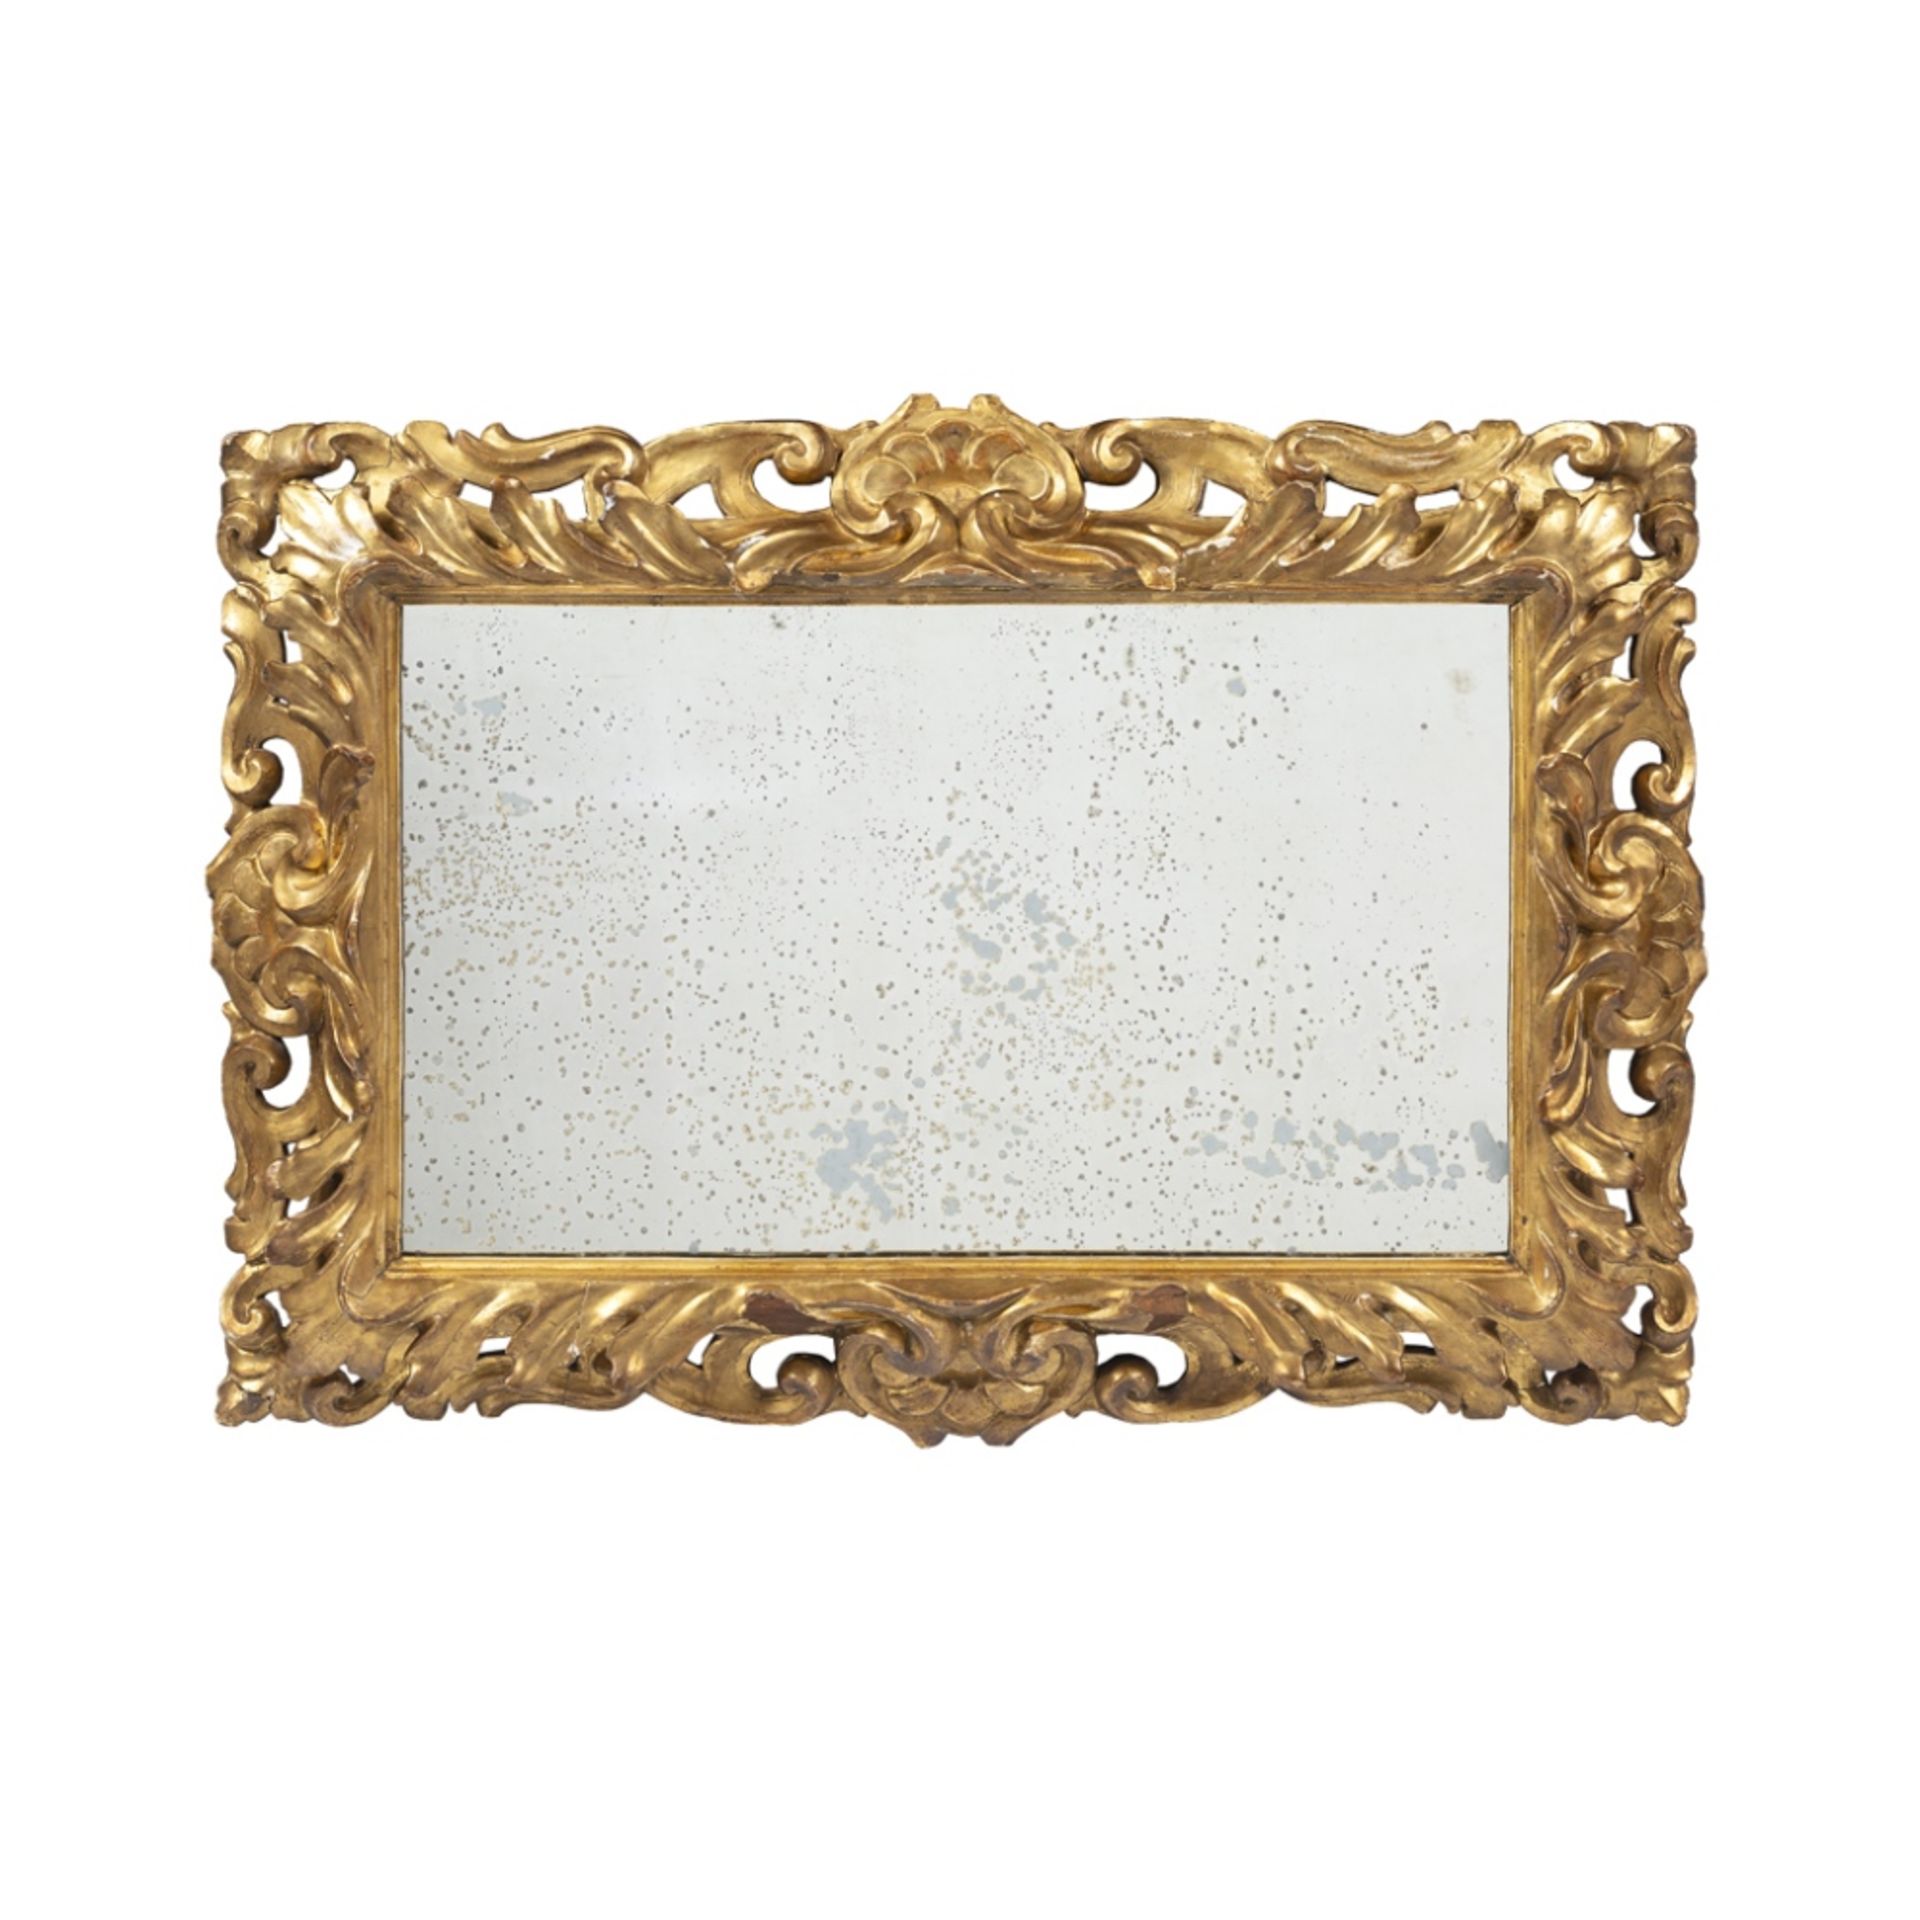 FLORENTINE GILTWOOD MIRROR19TH CENTURY the rectangular mirror plate in a frame pierced and carved